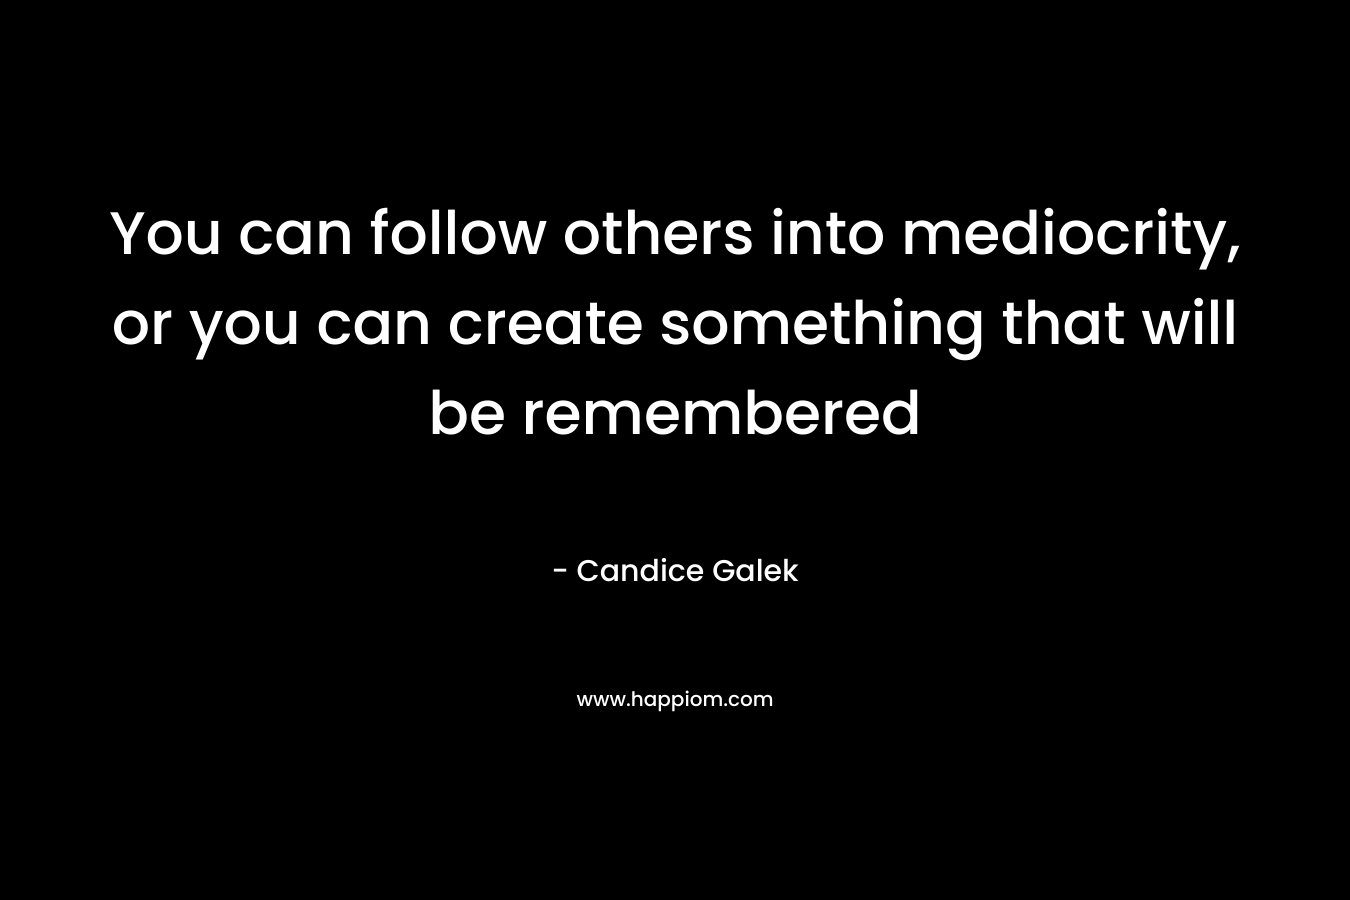 You can follow others into mediocrity, or you can create something that will be remembered